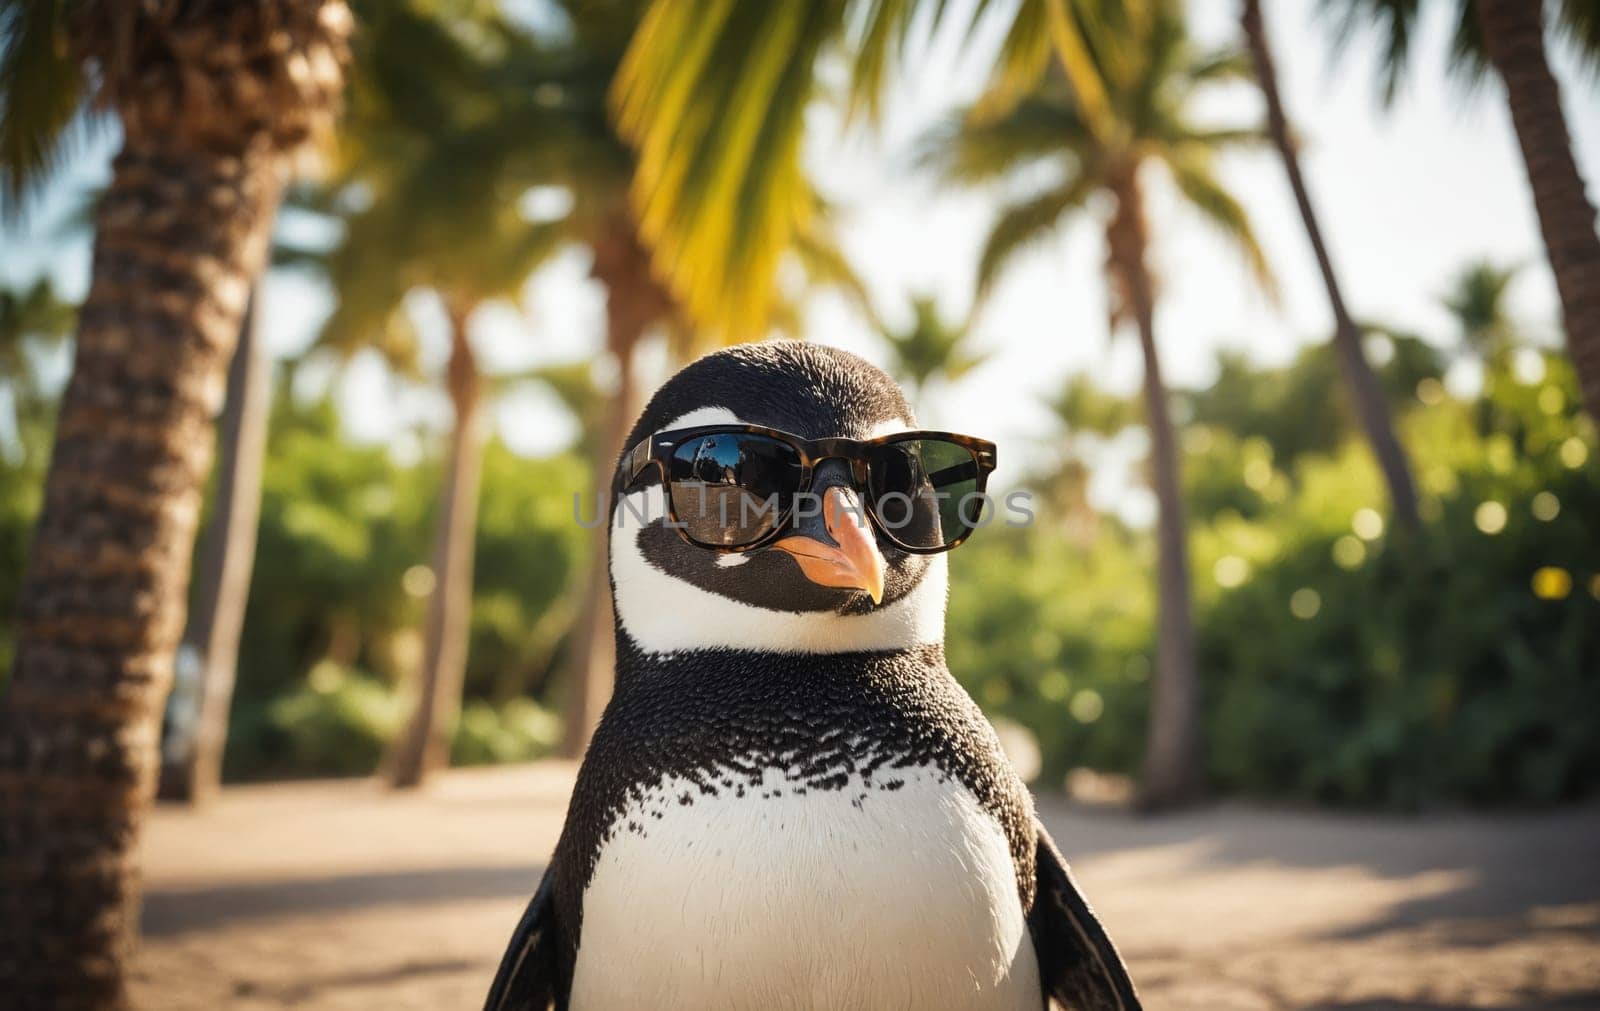 Capture the fun side of penguins in this unique image. Wearing a pair of cool sunglasses, this penguin seems ready for a day out in the sun.